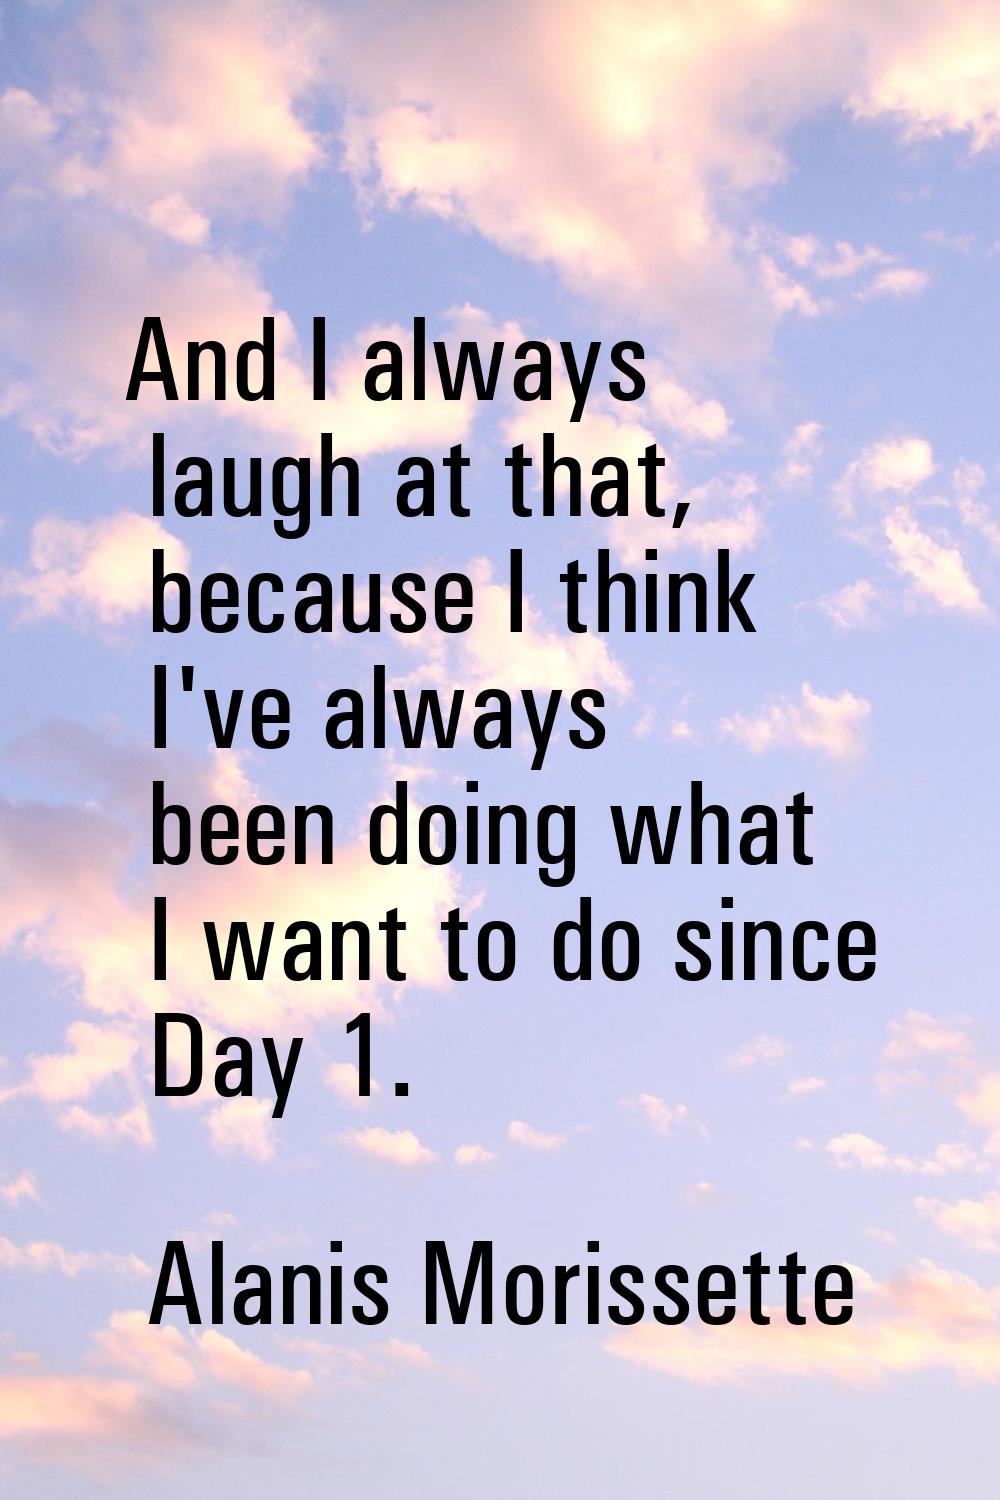 And I always laugh at that, because I think I've always been doing what I want to do since Day 1.